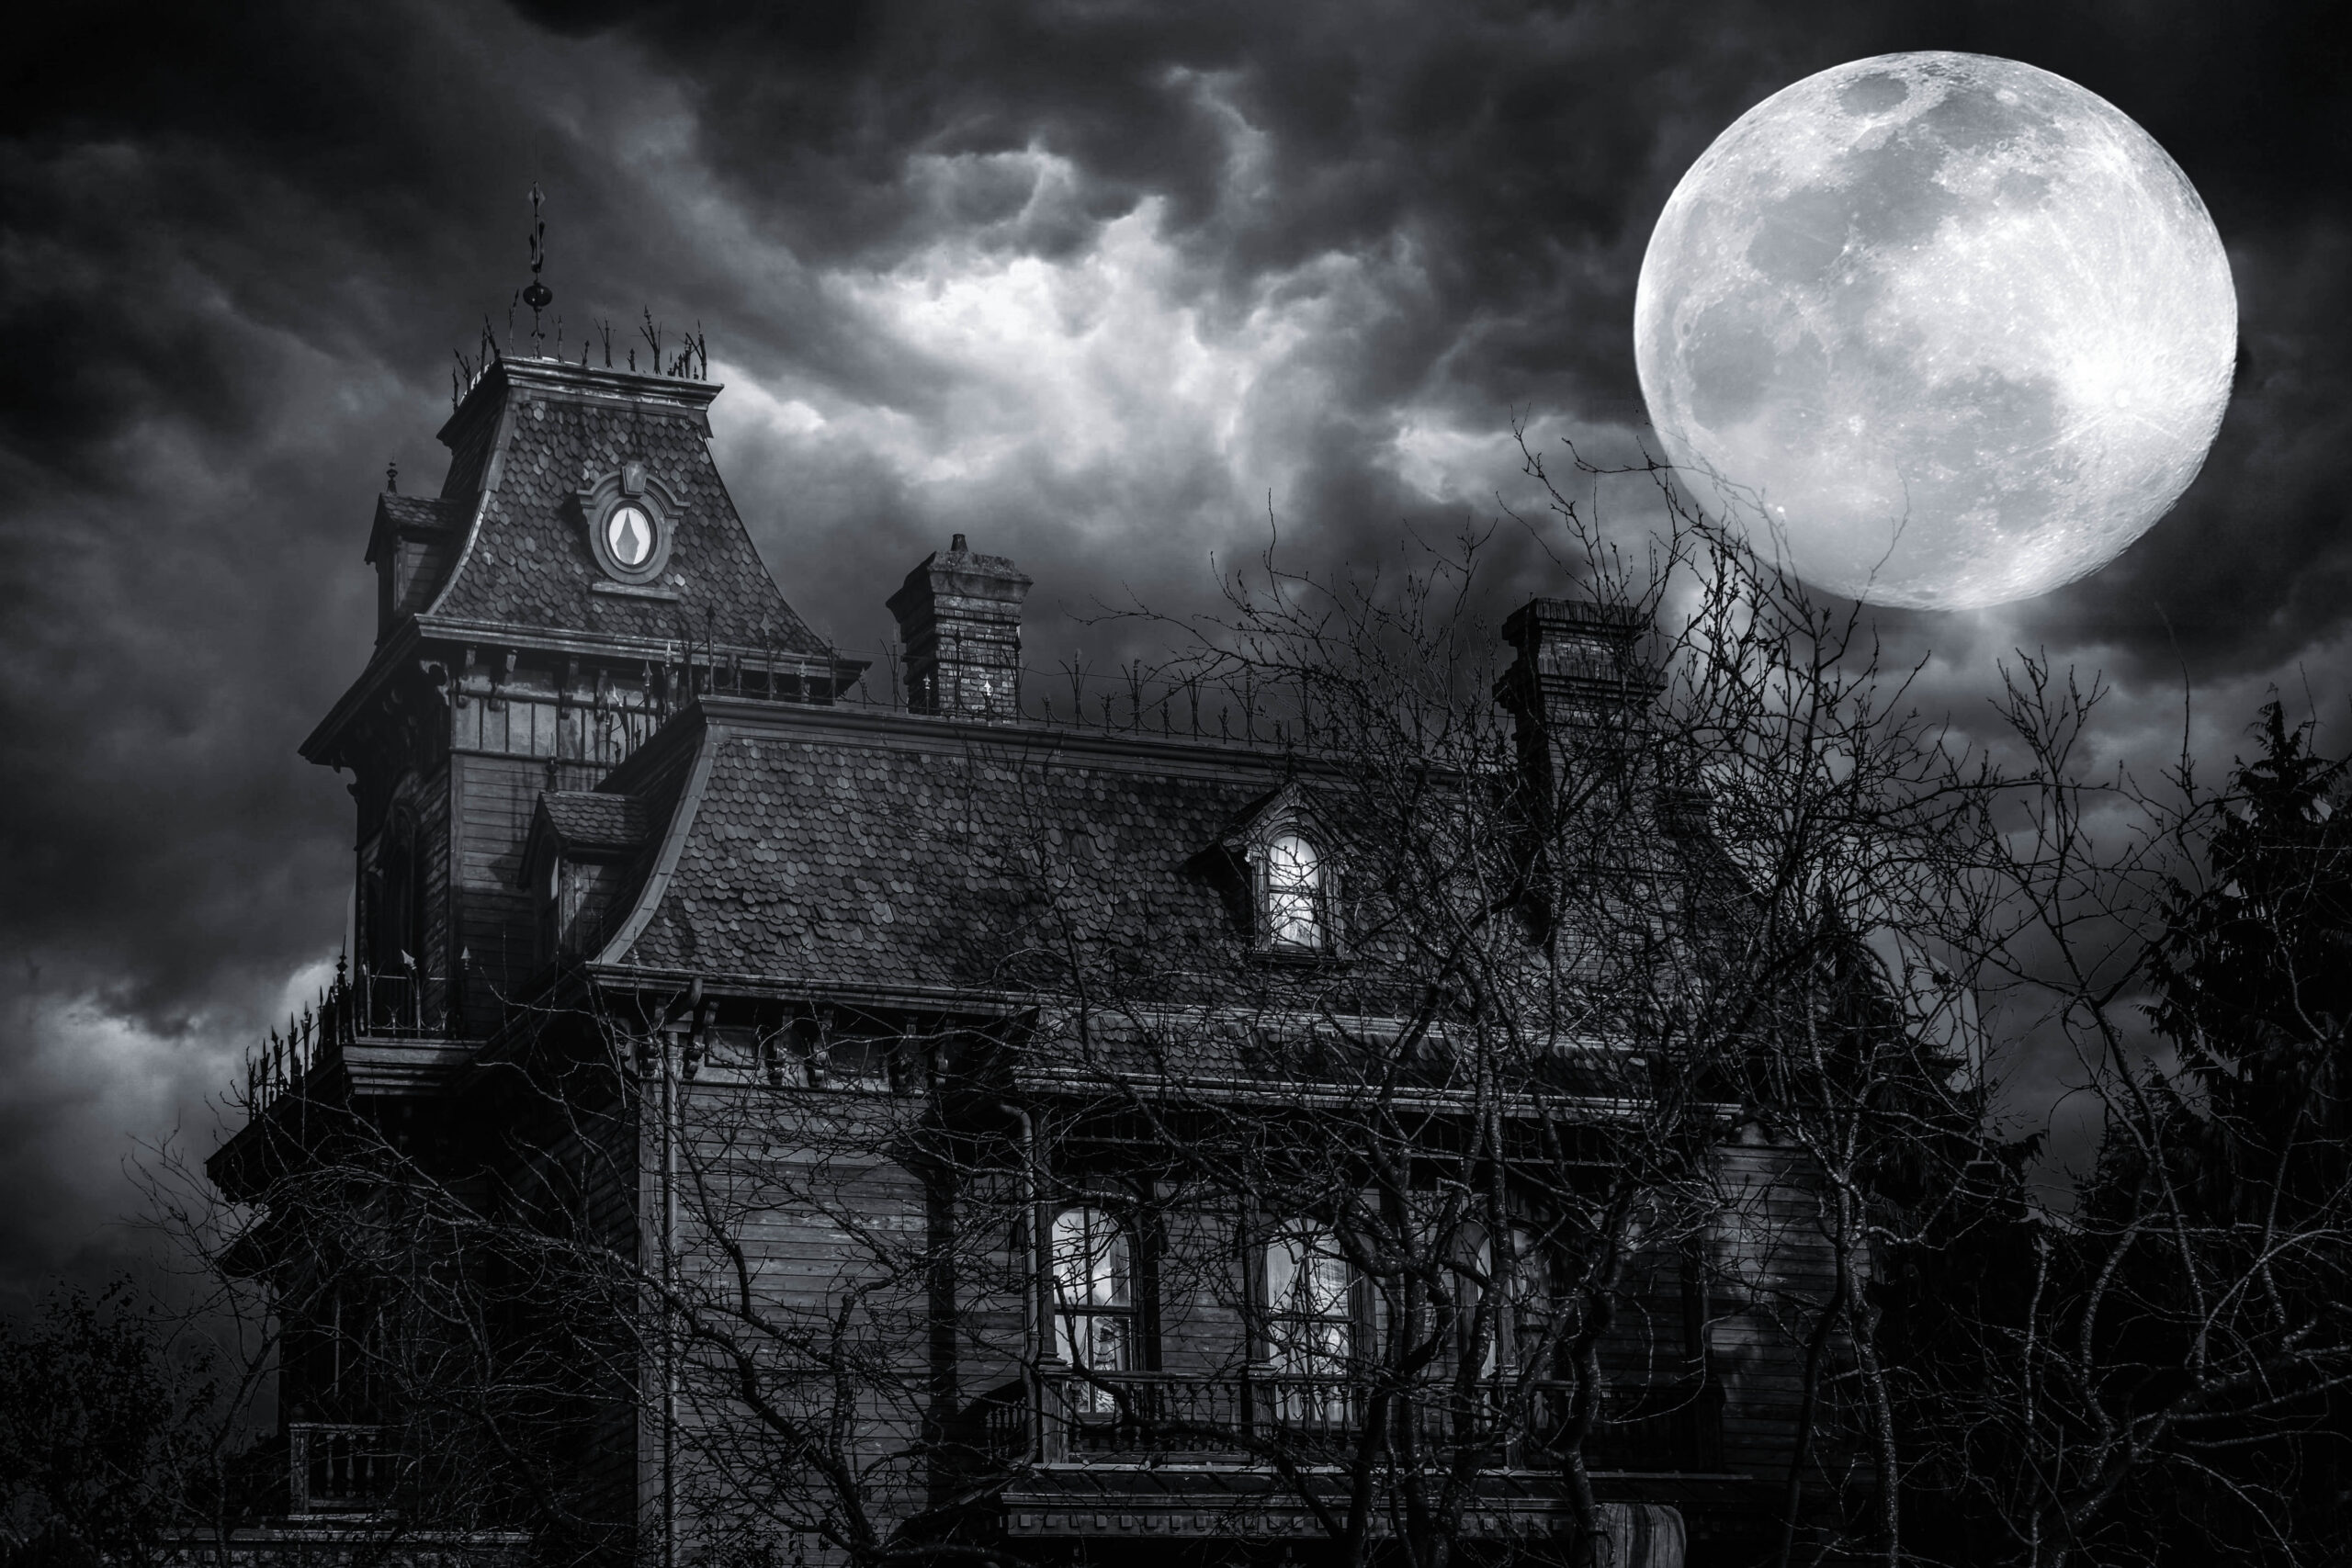  One North Carolina Haunted House Titled Scariest In The U.S. 